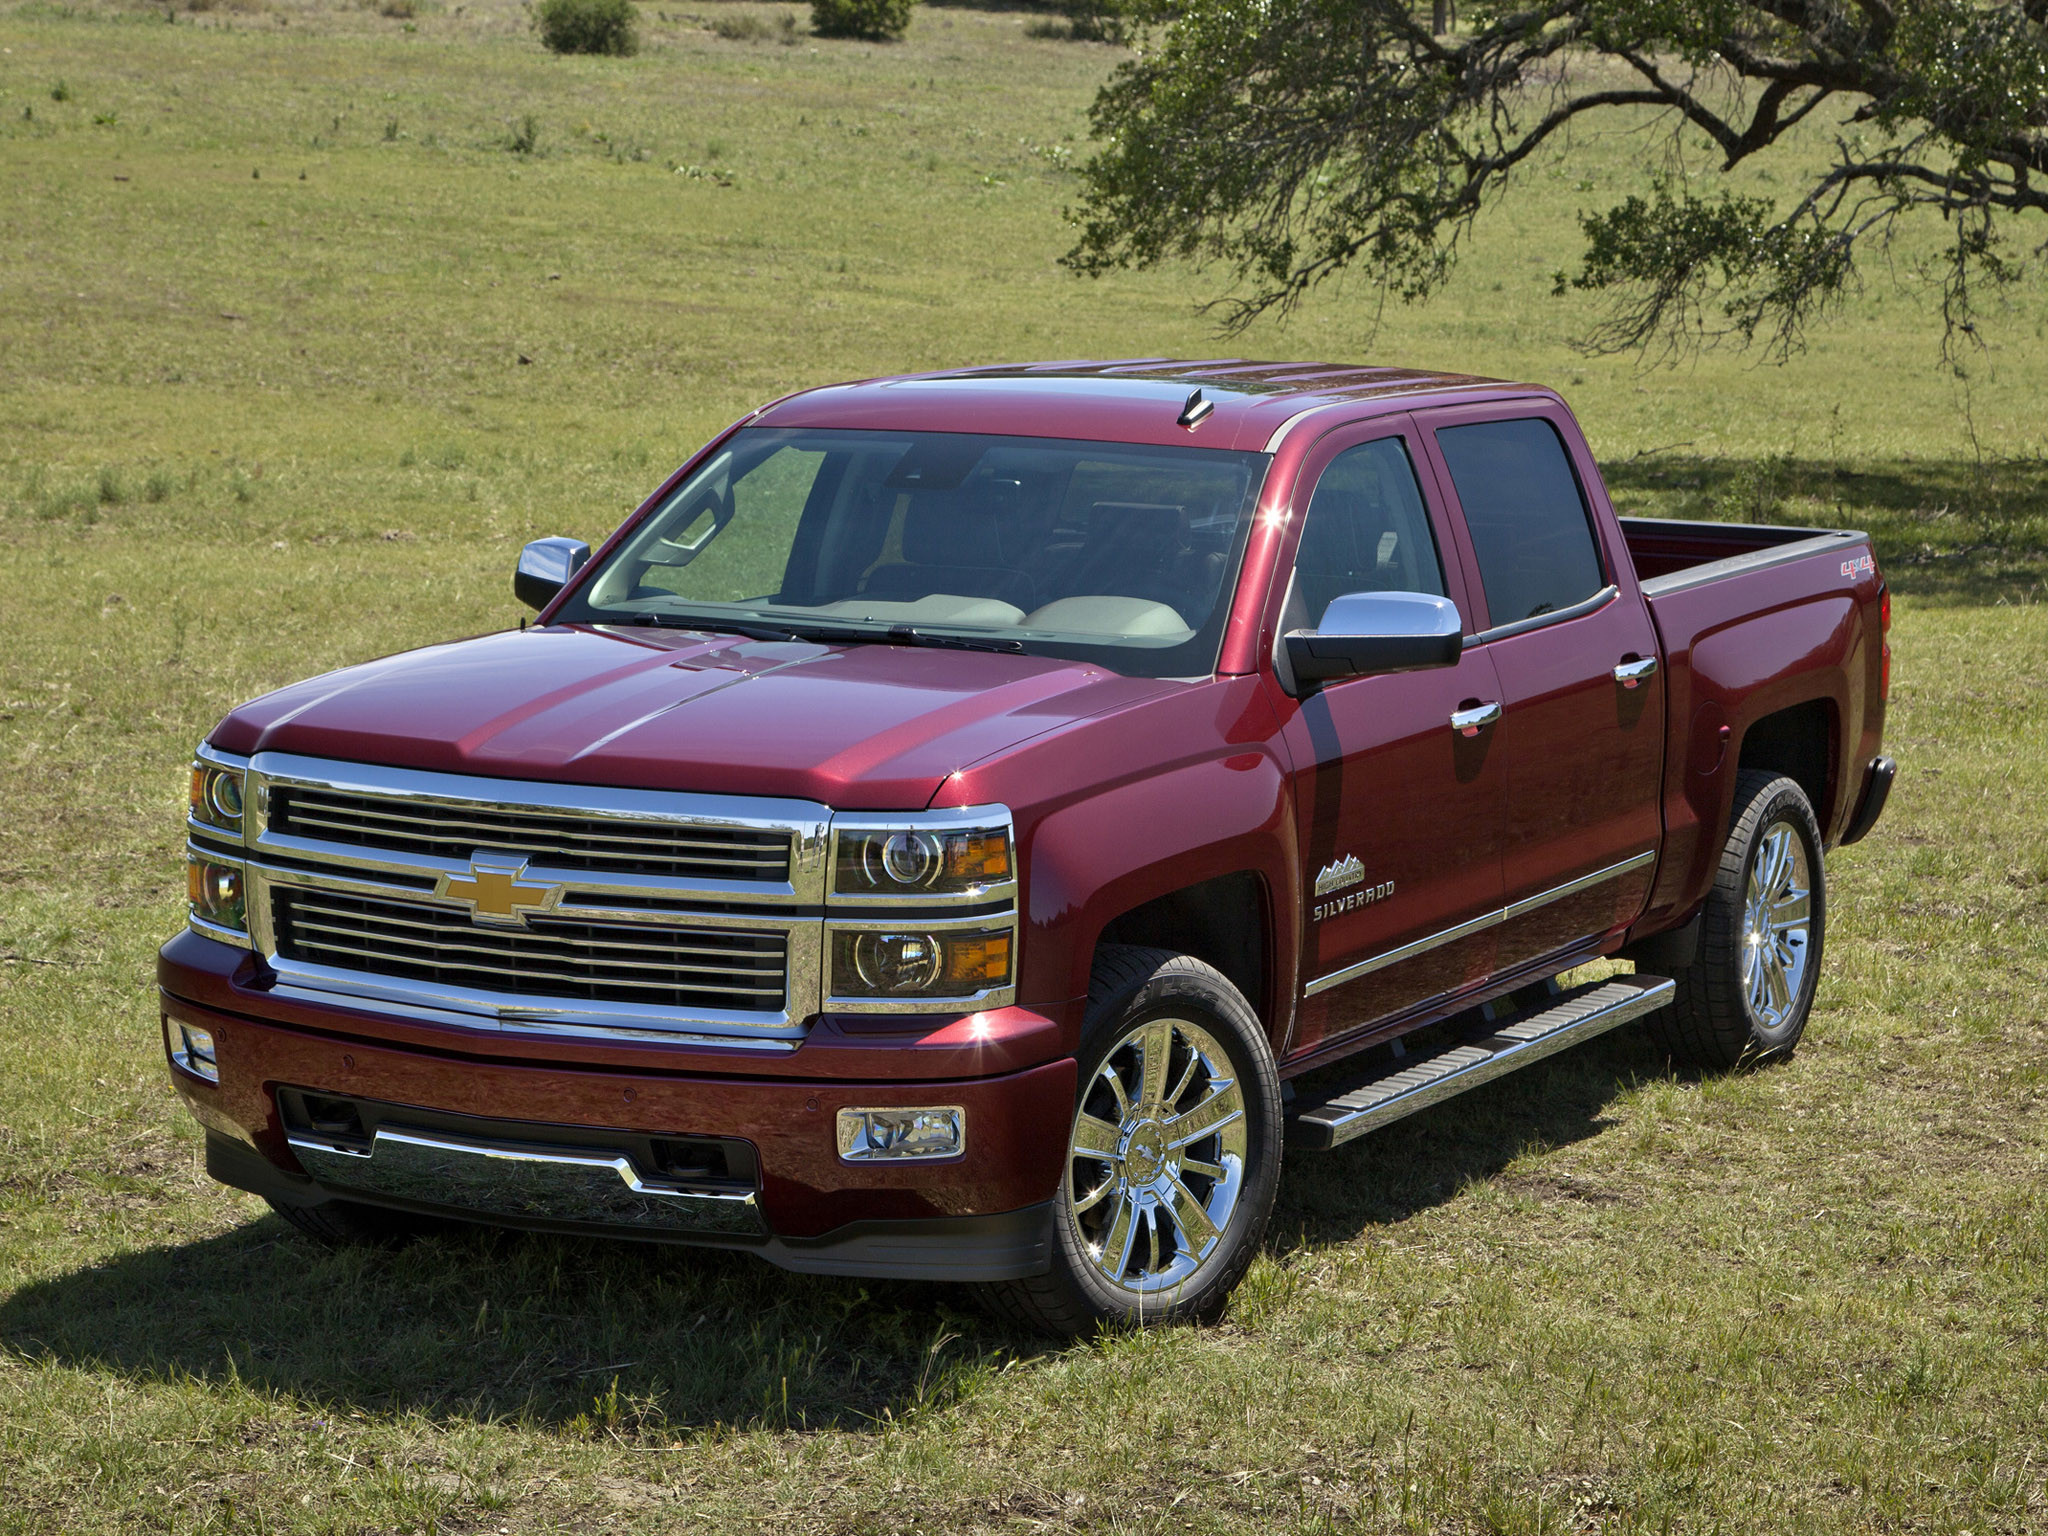 2048x1536 First big purchase once im hired, a 2015 burgundy Chevrolet Silverado truck